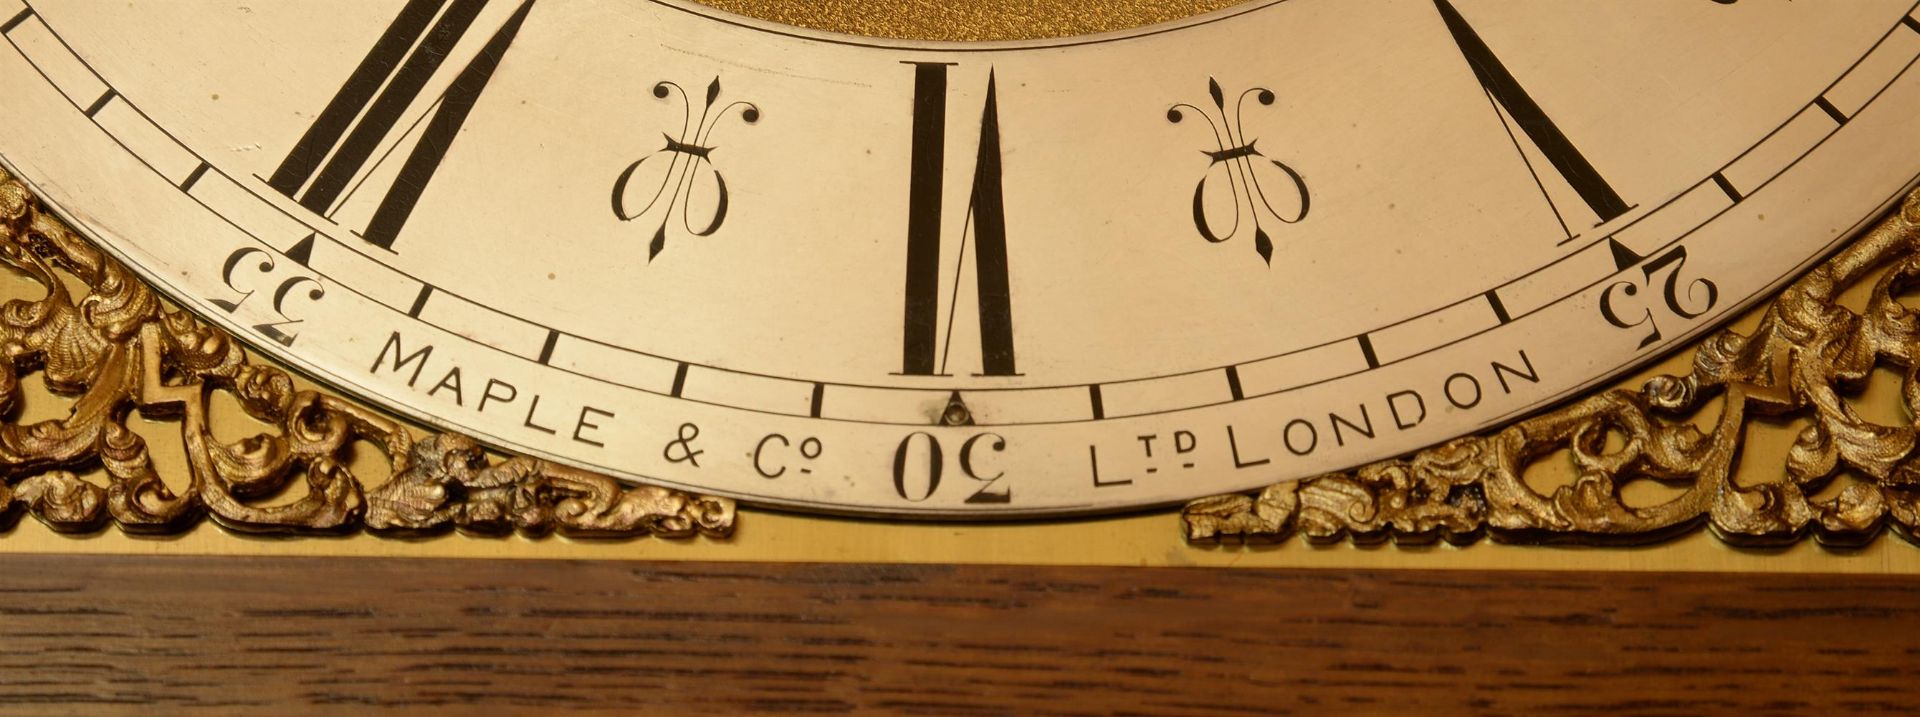 AN EDWARDIAN OAK QUARTER-CHIMING EIGHT-DAY LONGCASE CLOCK, RETAILED BY MAPLE & CO. - Image 3 of 3